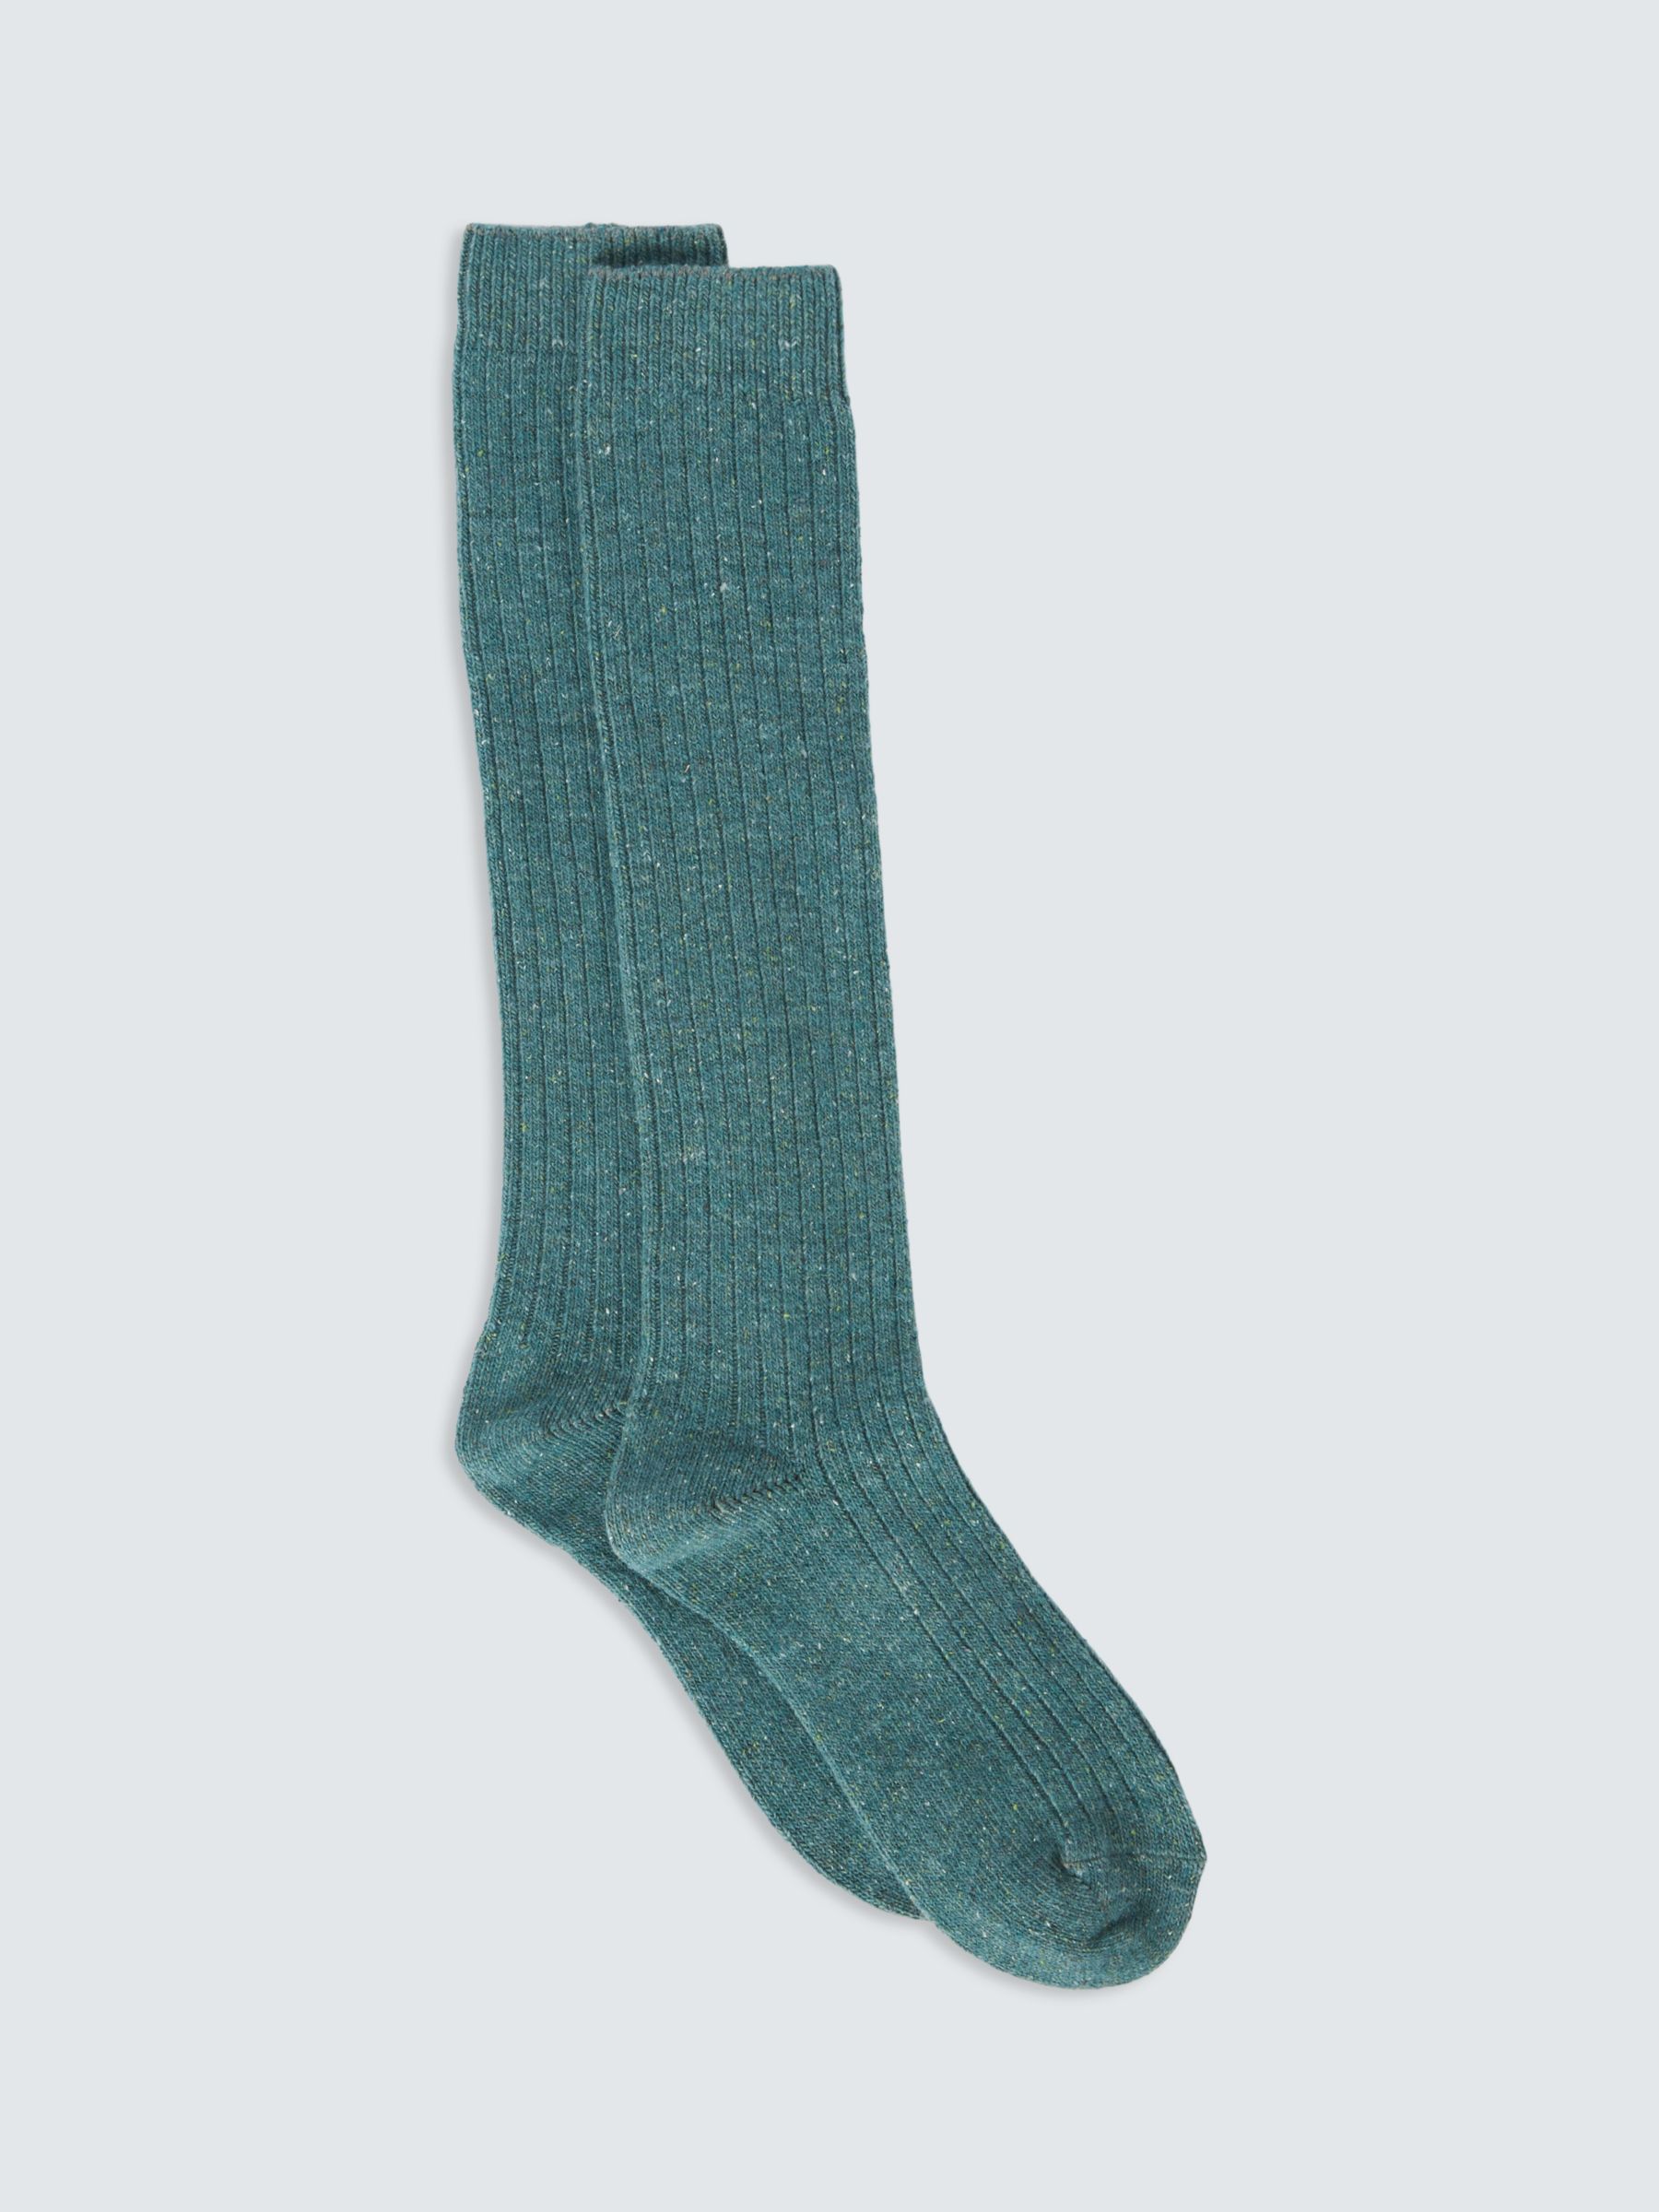 Essentials Women's Turn Cuff Socks, 6 Pairs, Basic Colors, 6-9 :  : Clothing, Shoes & Accessories